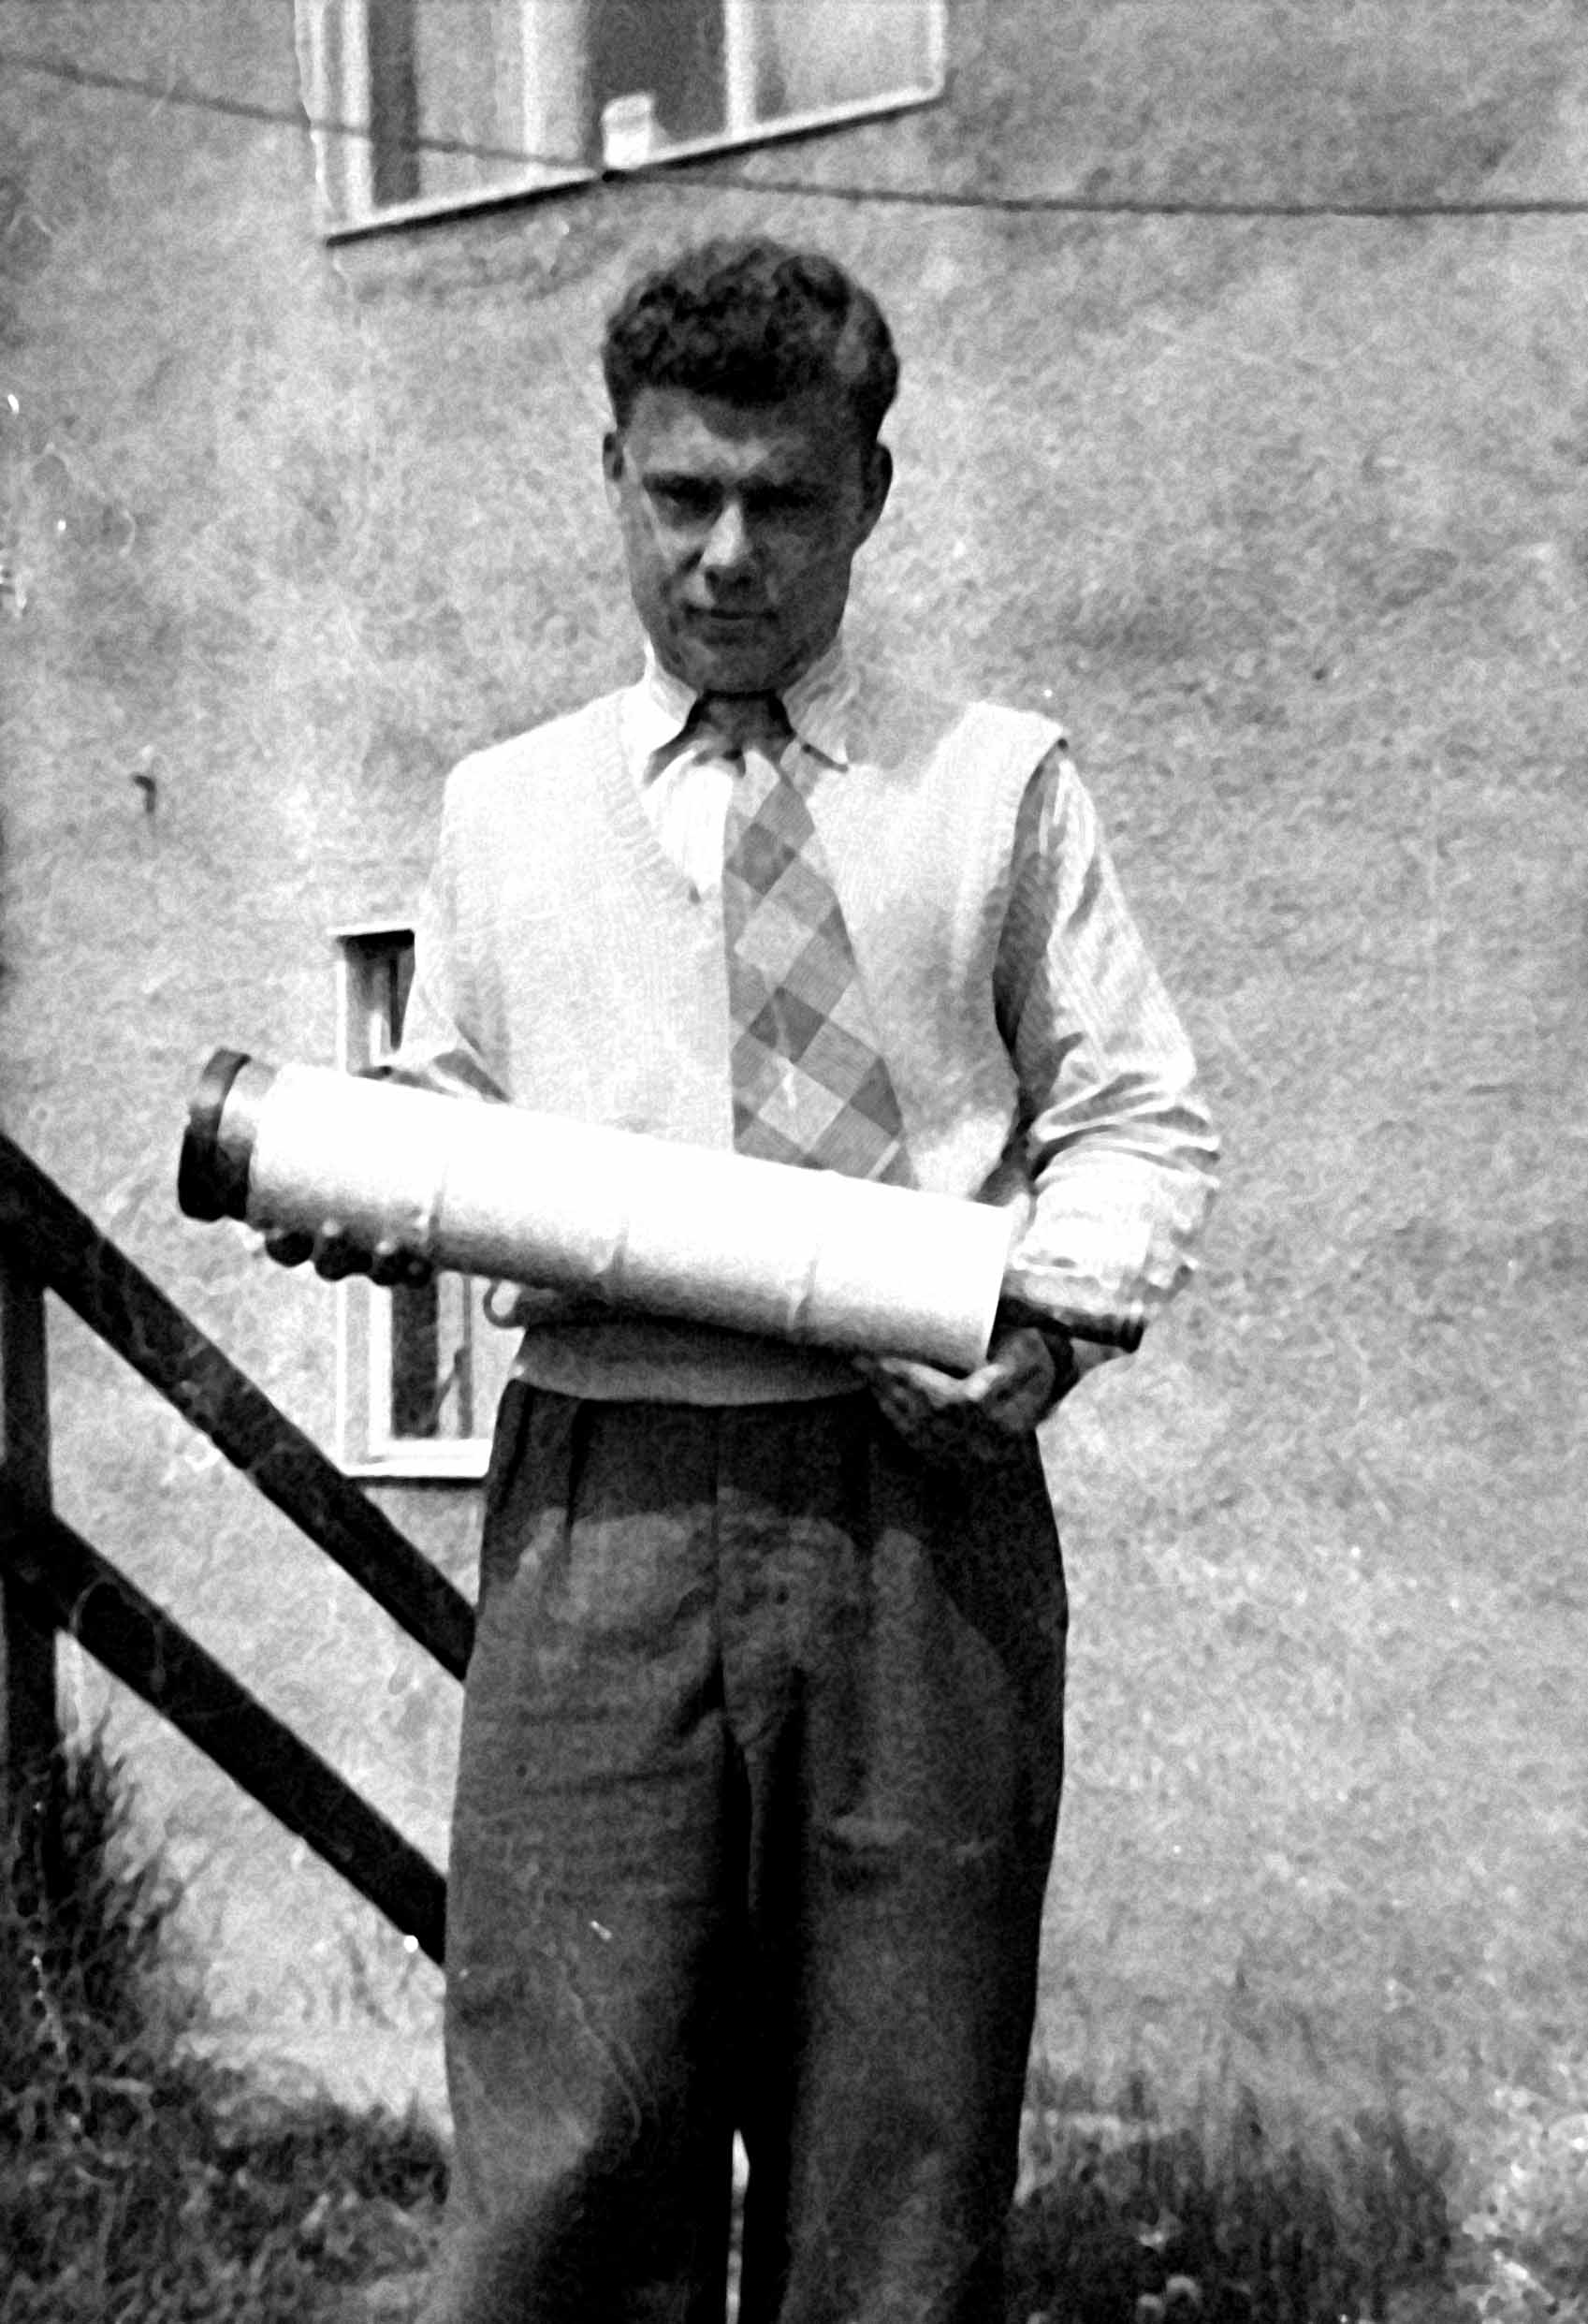 Early home built telescope made by Harry circa 1955